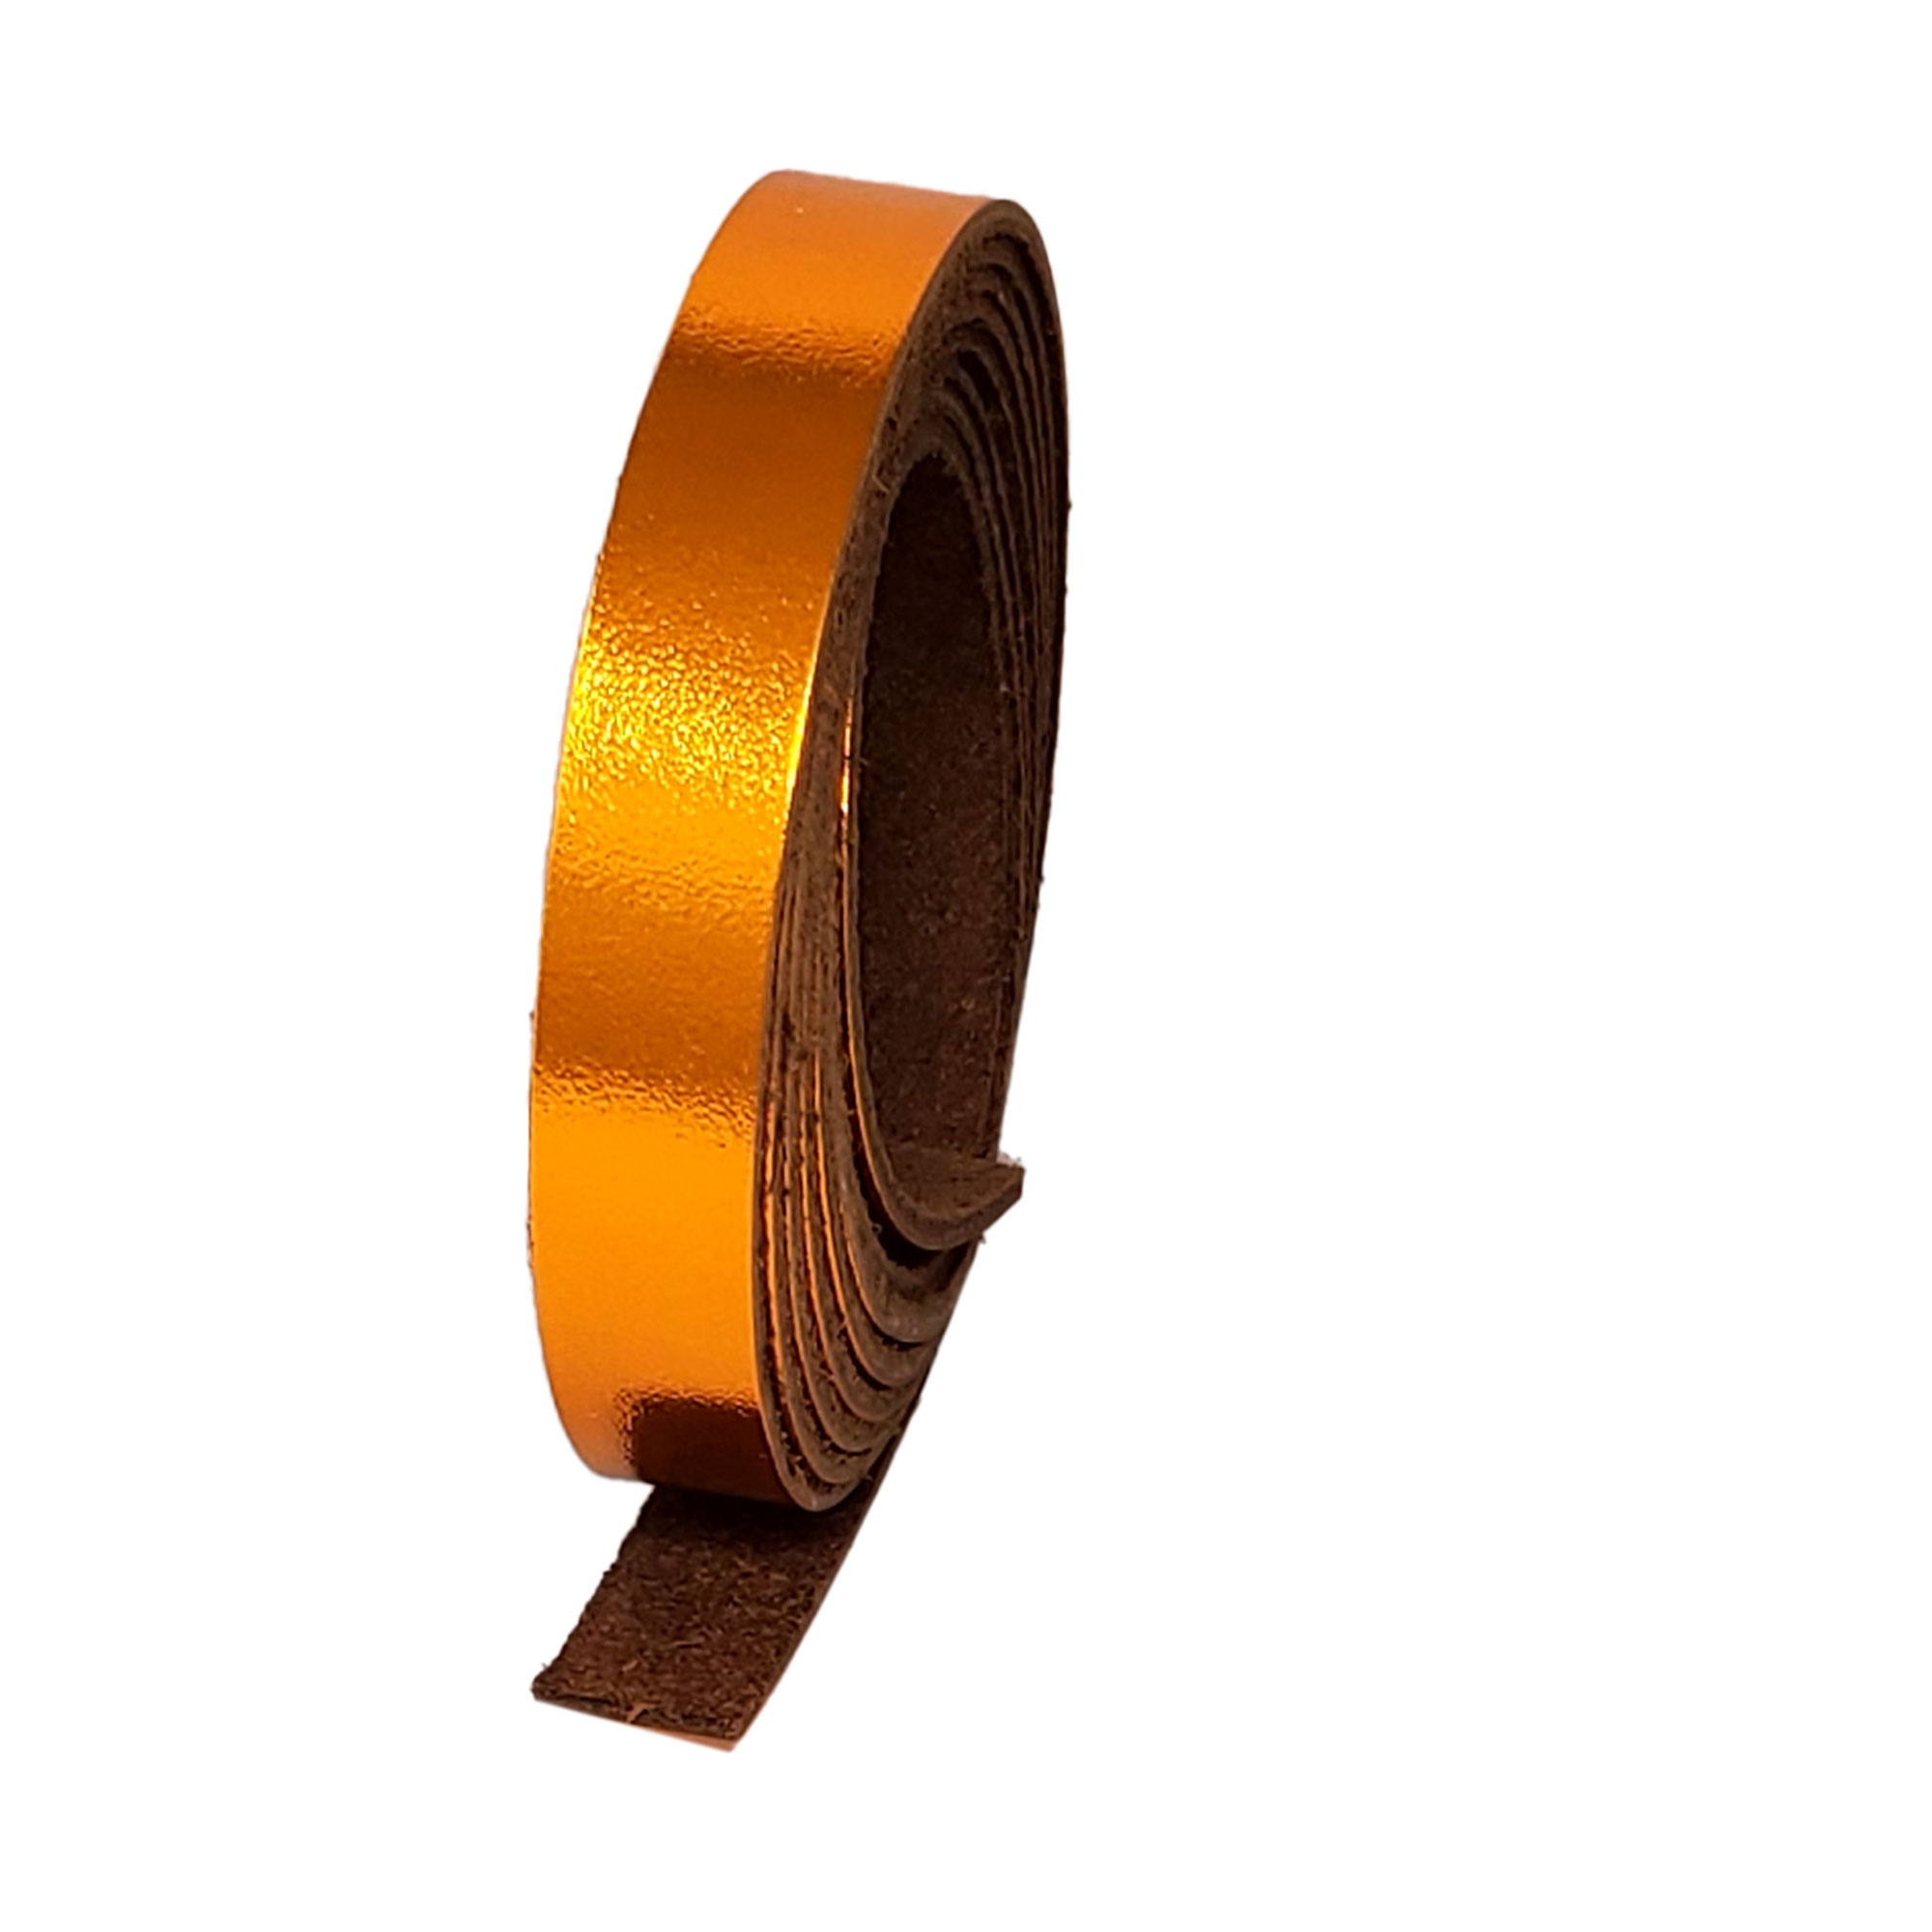 Leather Straps for Crafts, 1/2 Wide Full Grain Leather Strips(Brown)